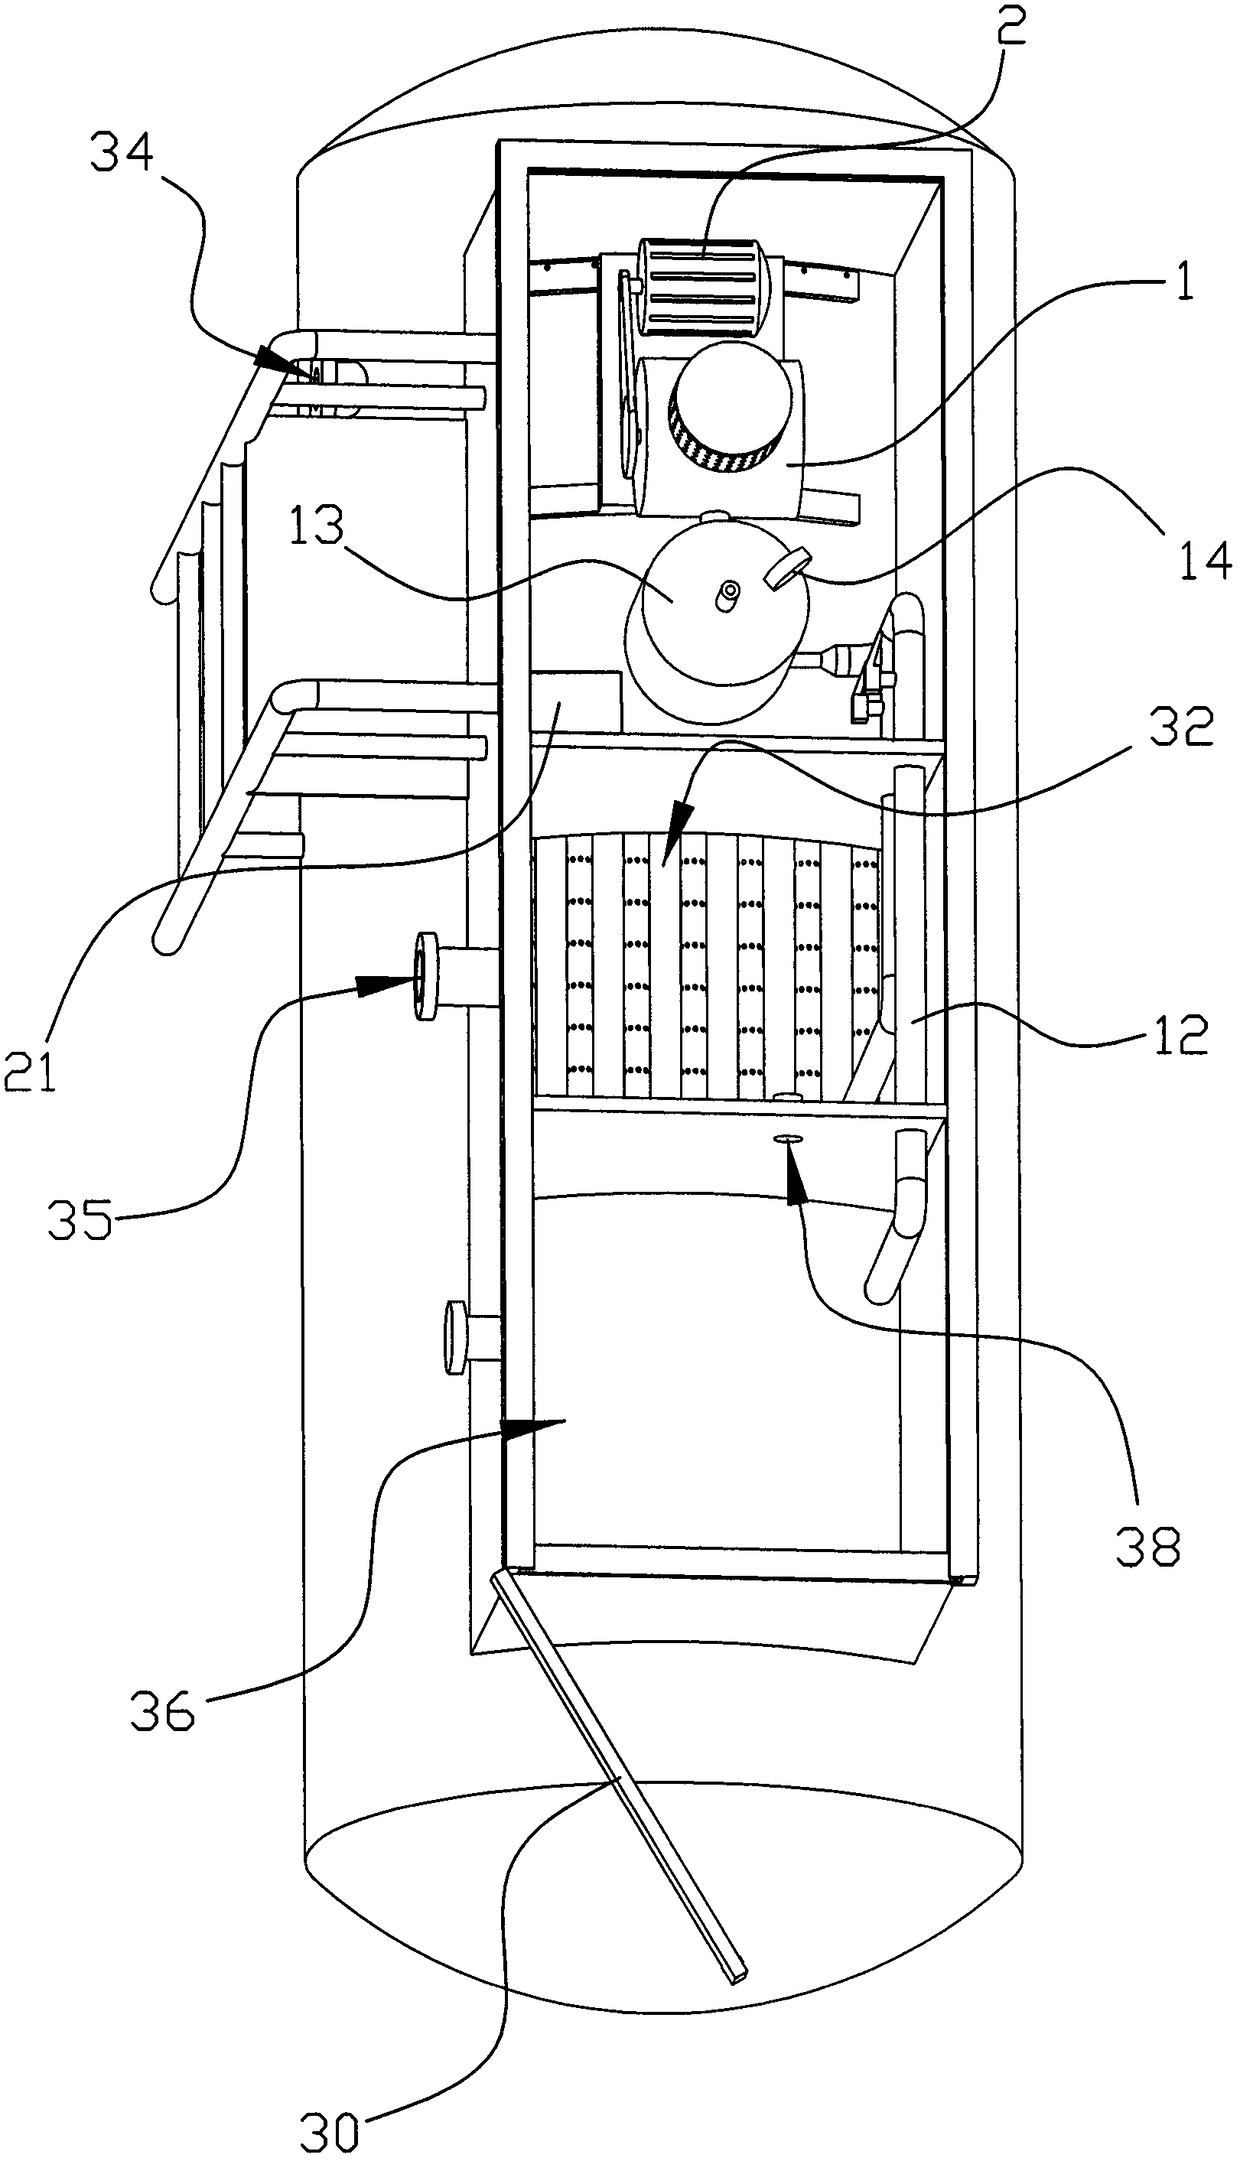 Water purification device